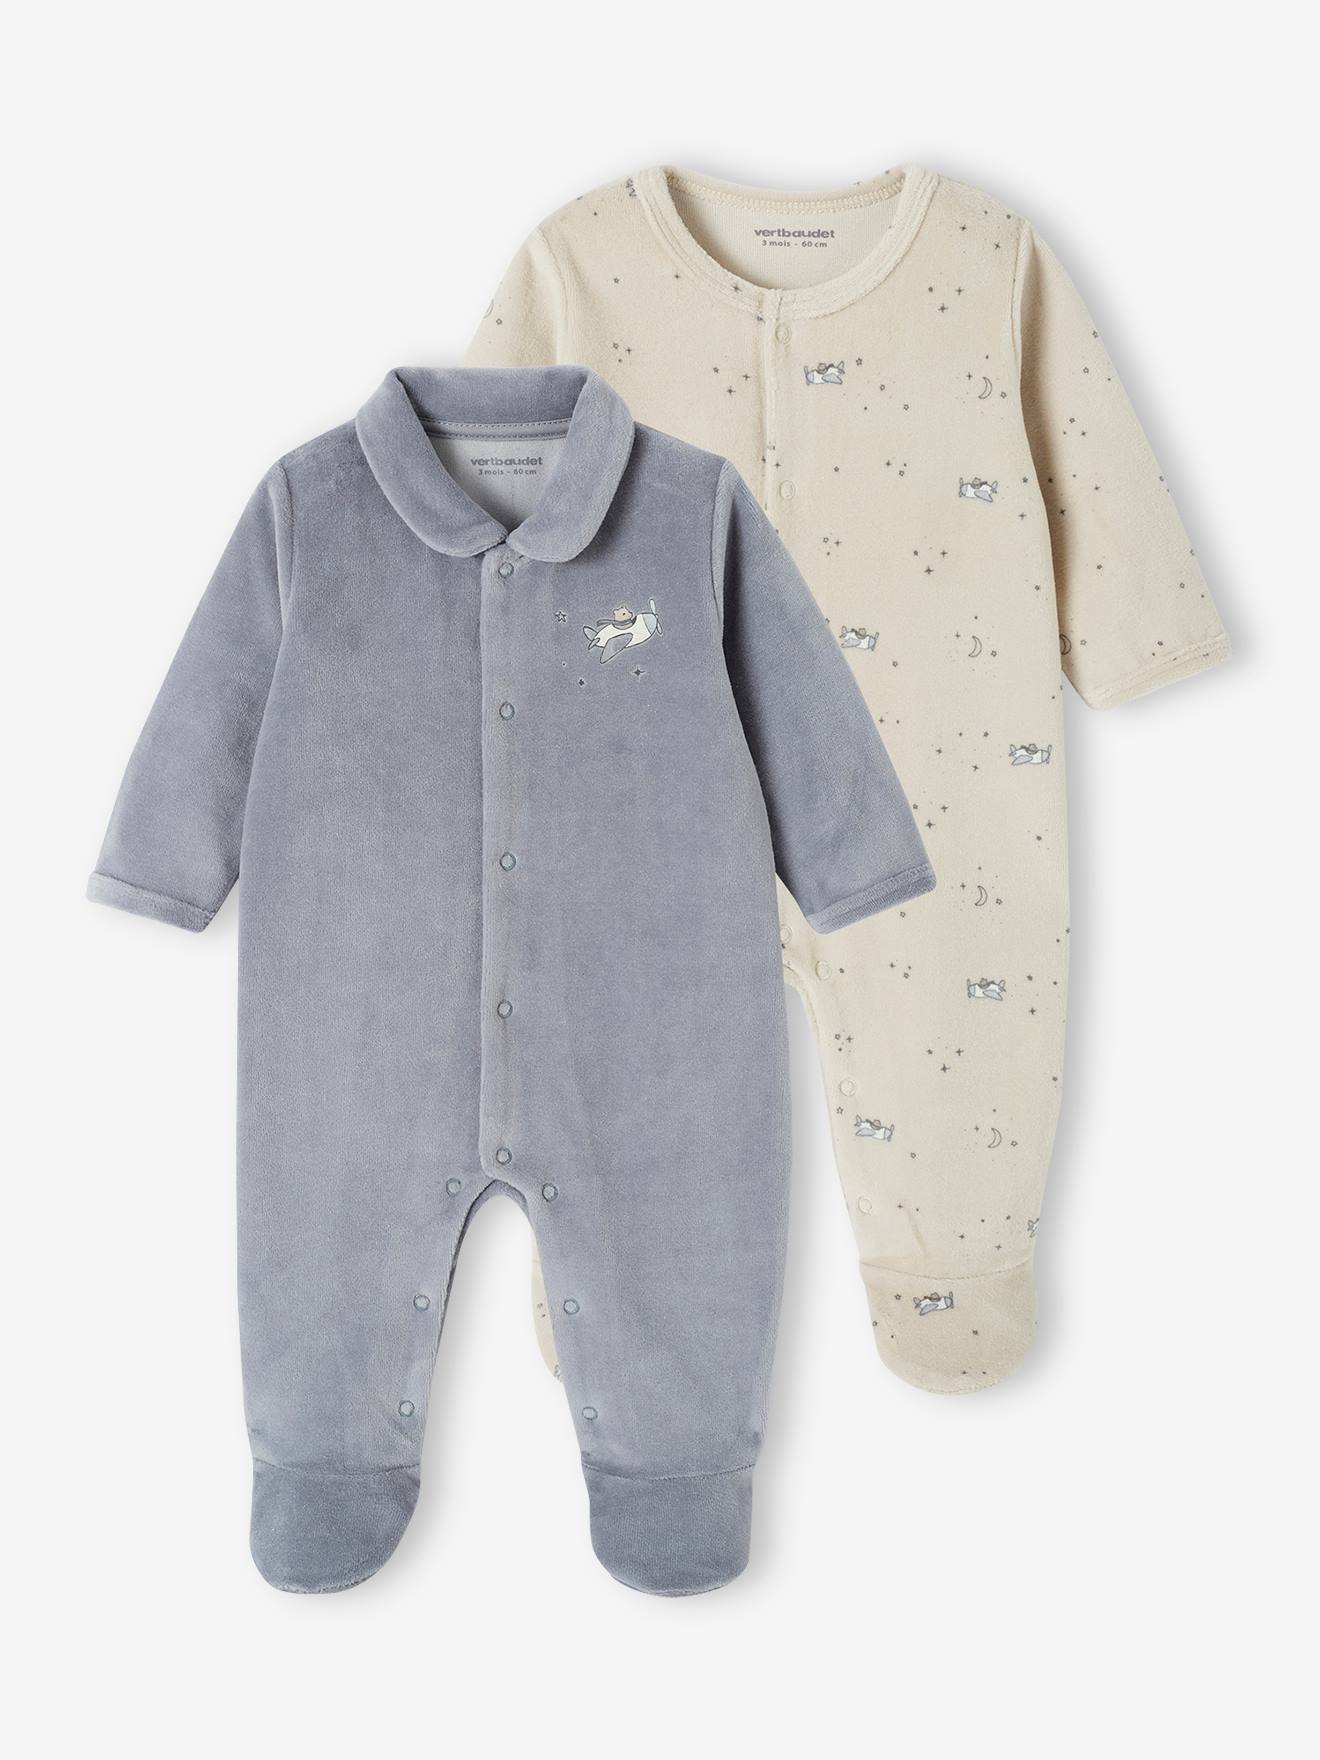 Pack of 2 Sleepsuits in Velour for Newborn Babies grey blue